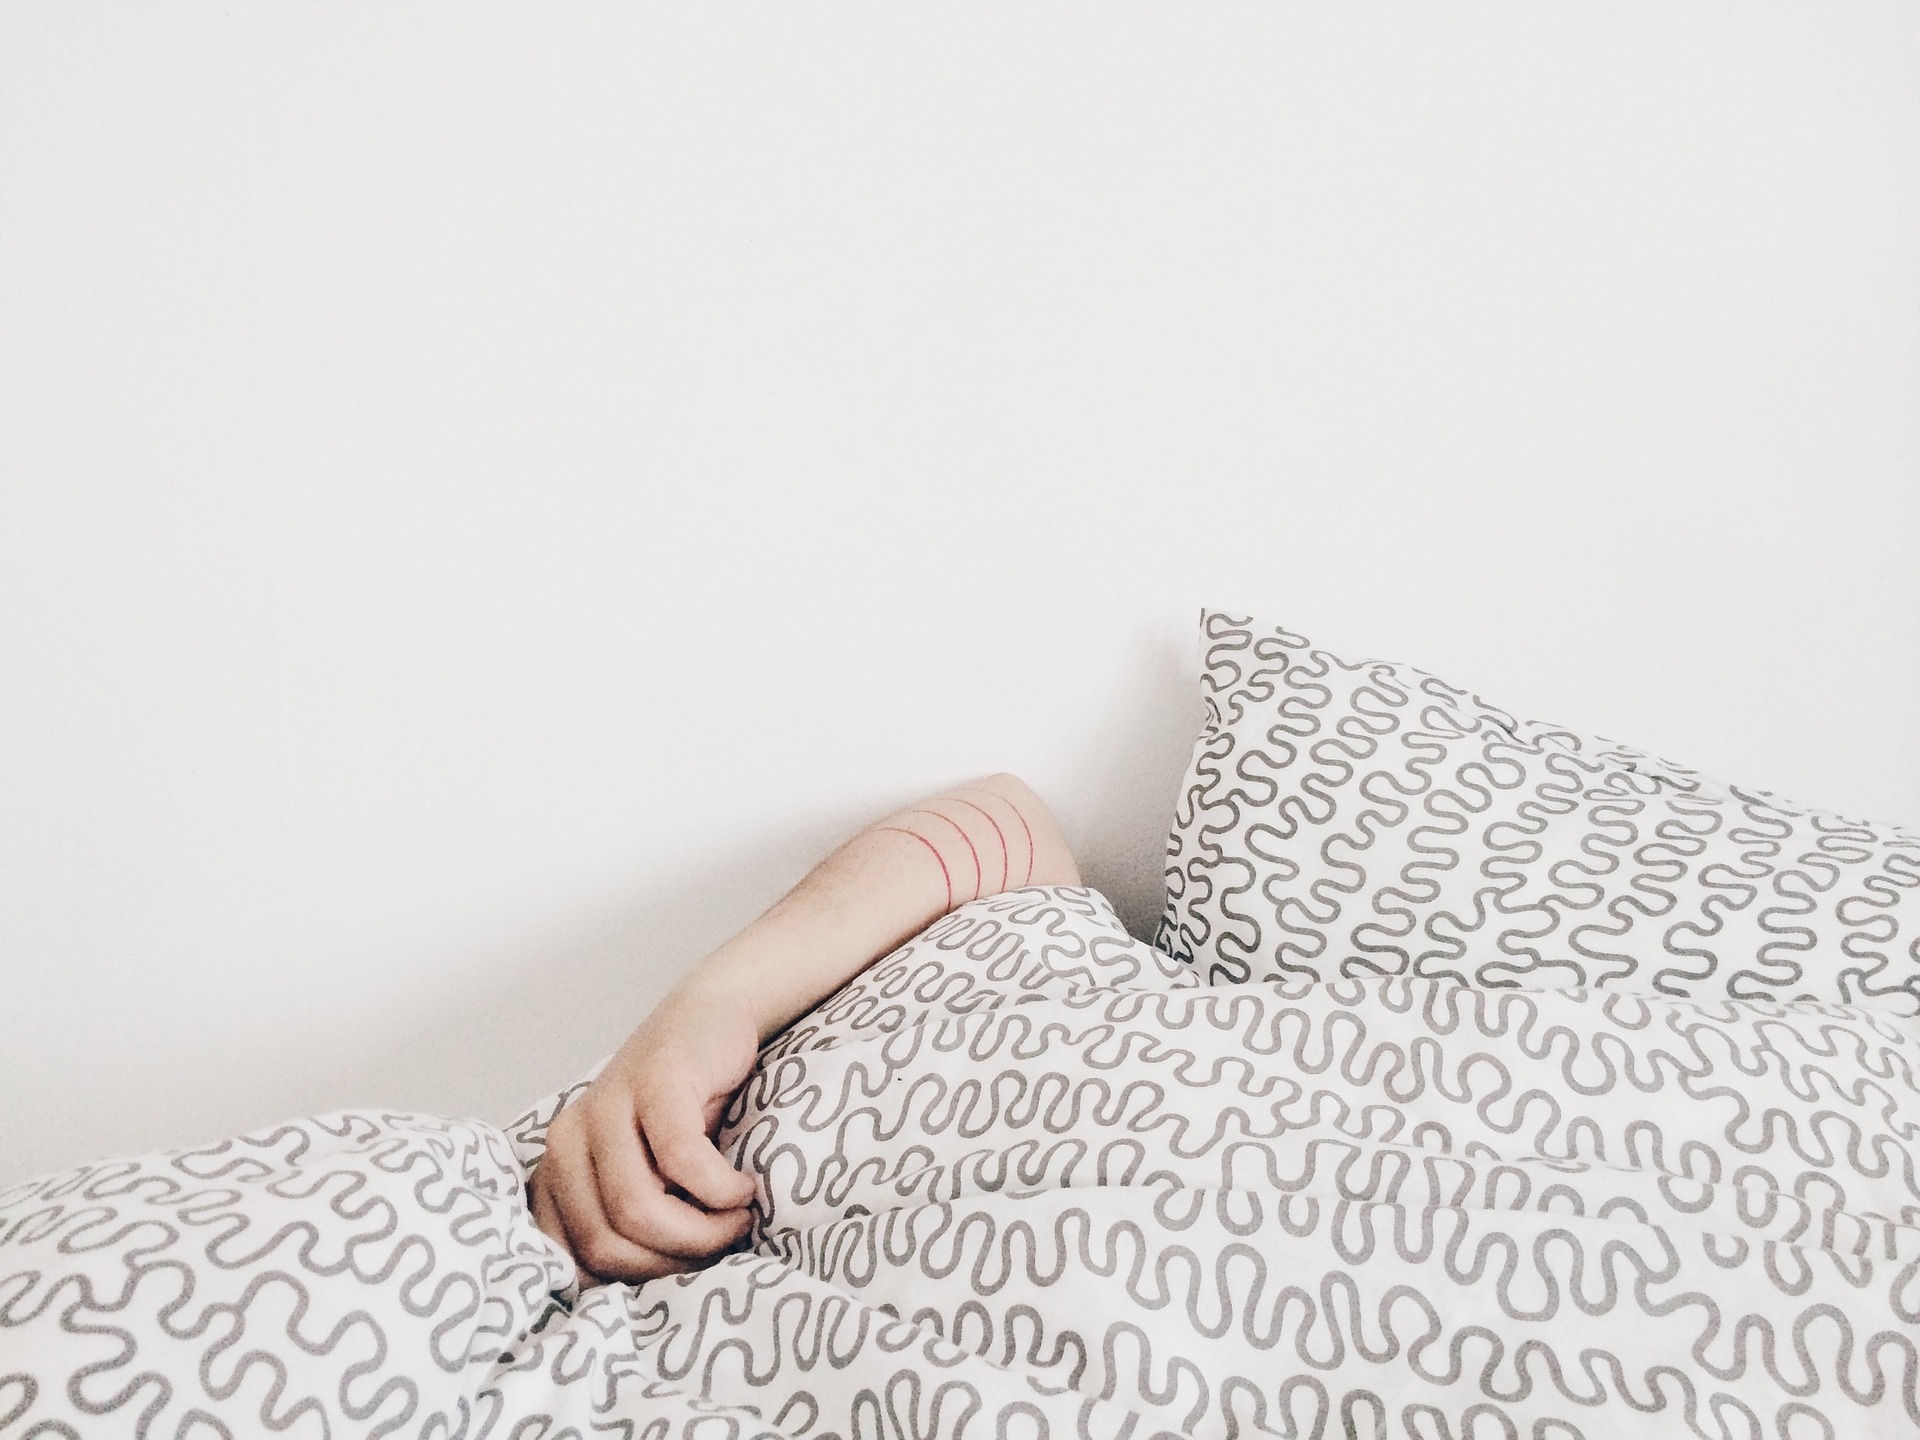 image shows someone in bed sleeping